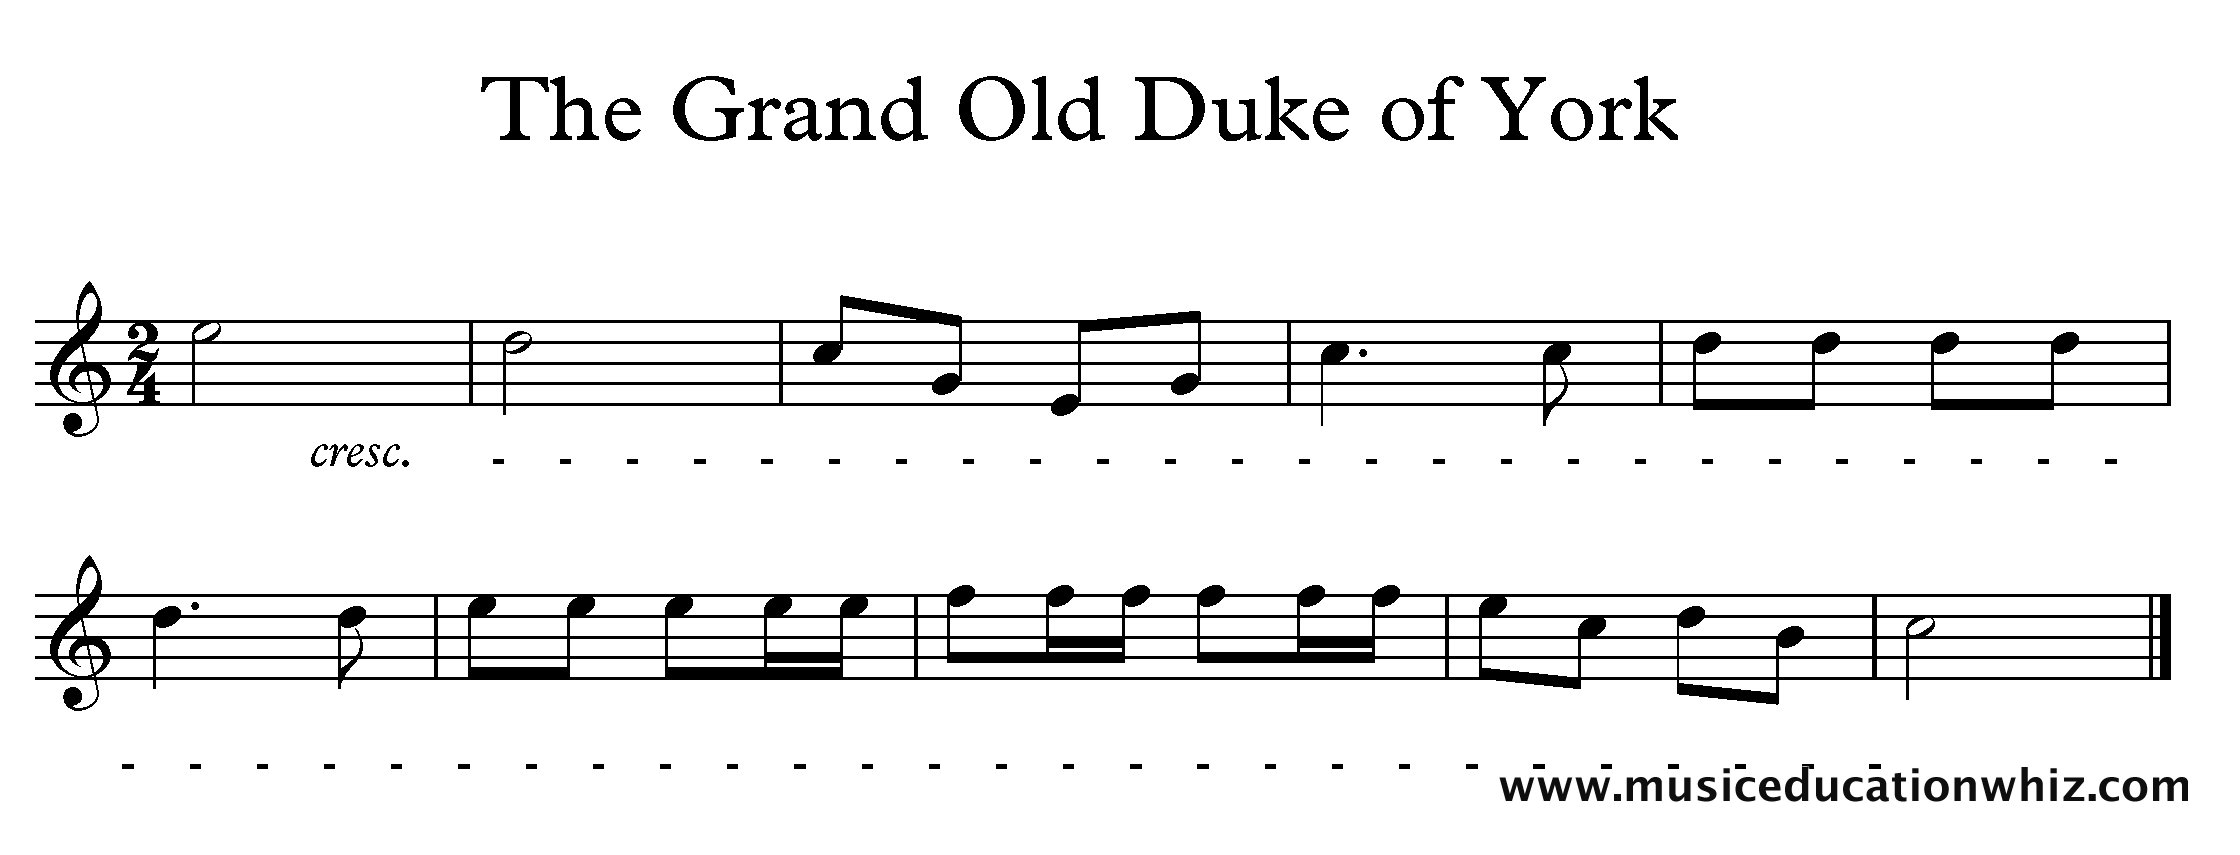 The Grand Old Duke of York melody with a cresc. followed by a dashed line to the end.